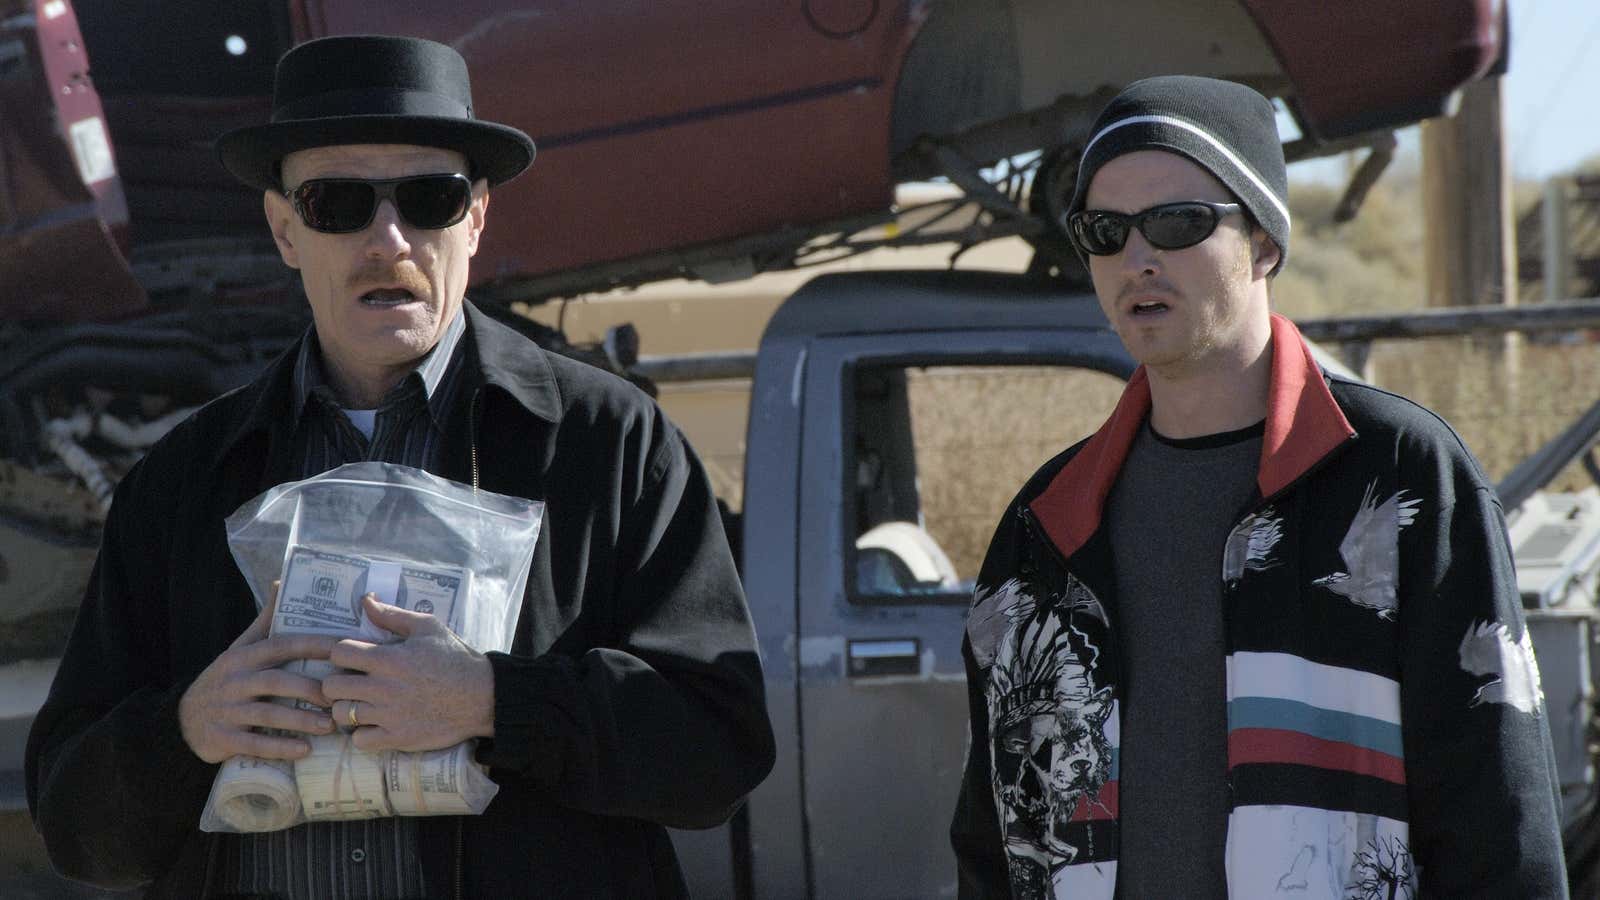 “Breaking Bad” wouldn’t have been the same.